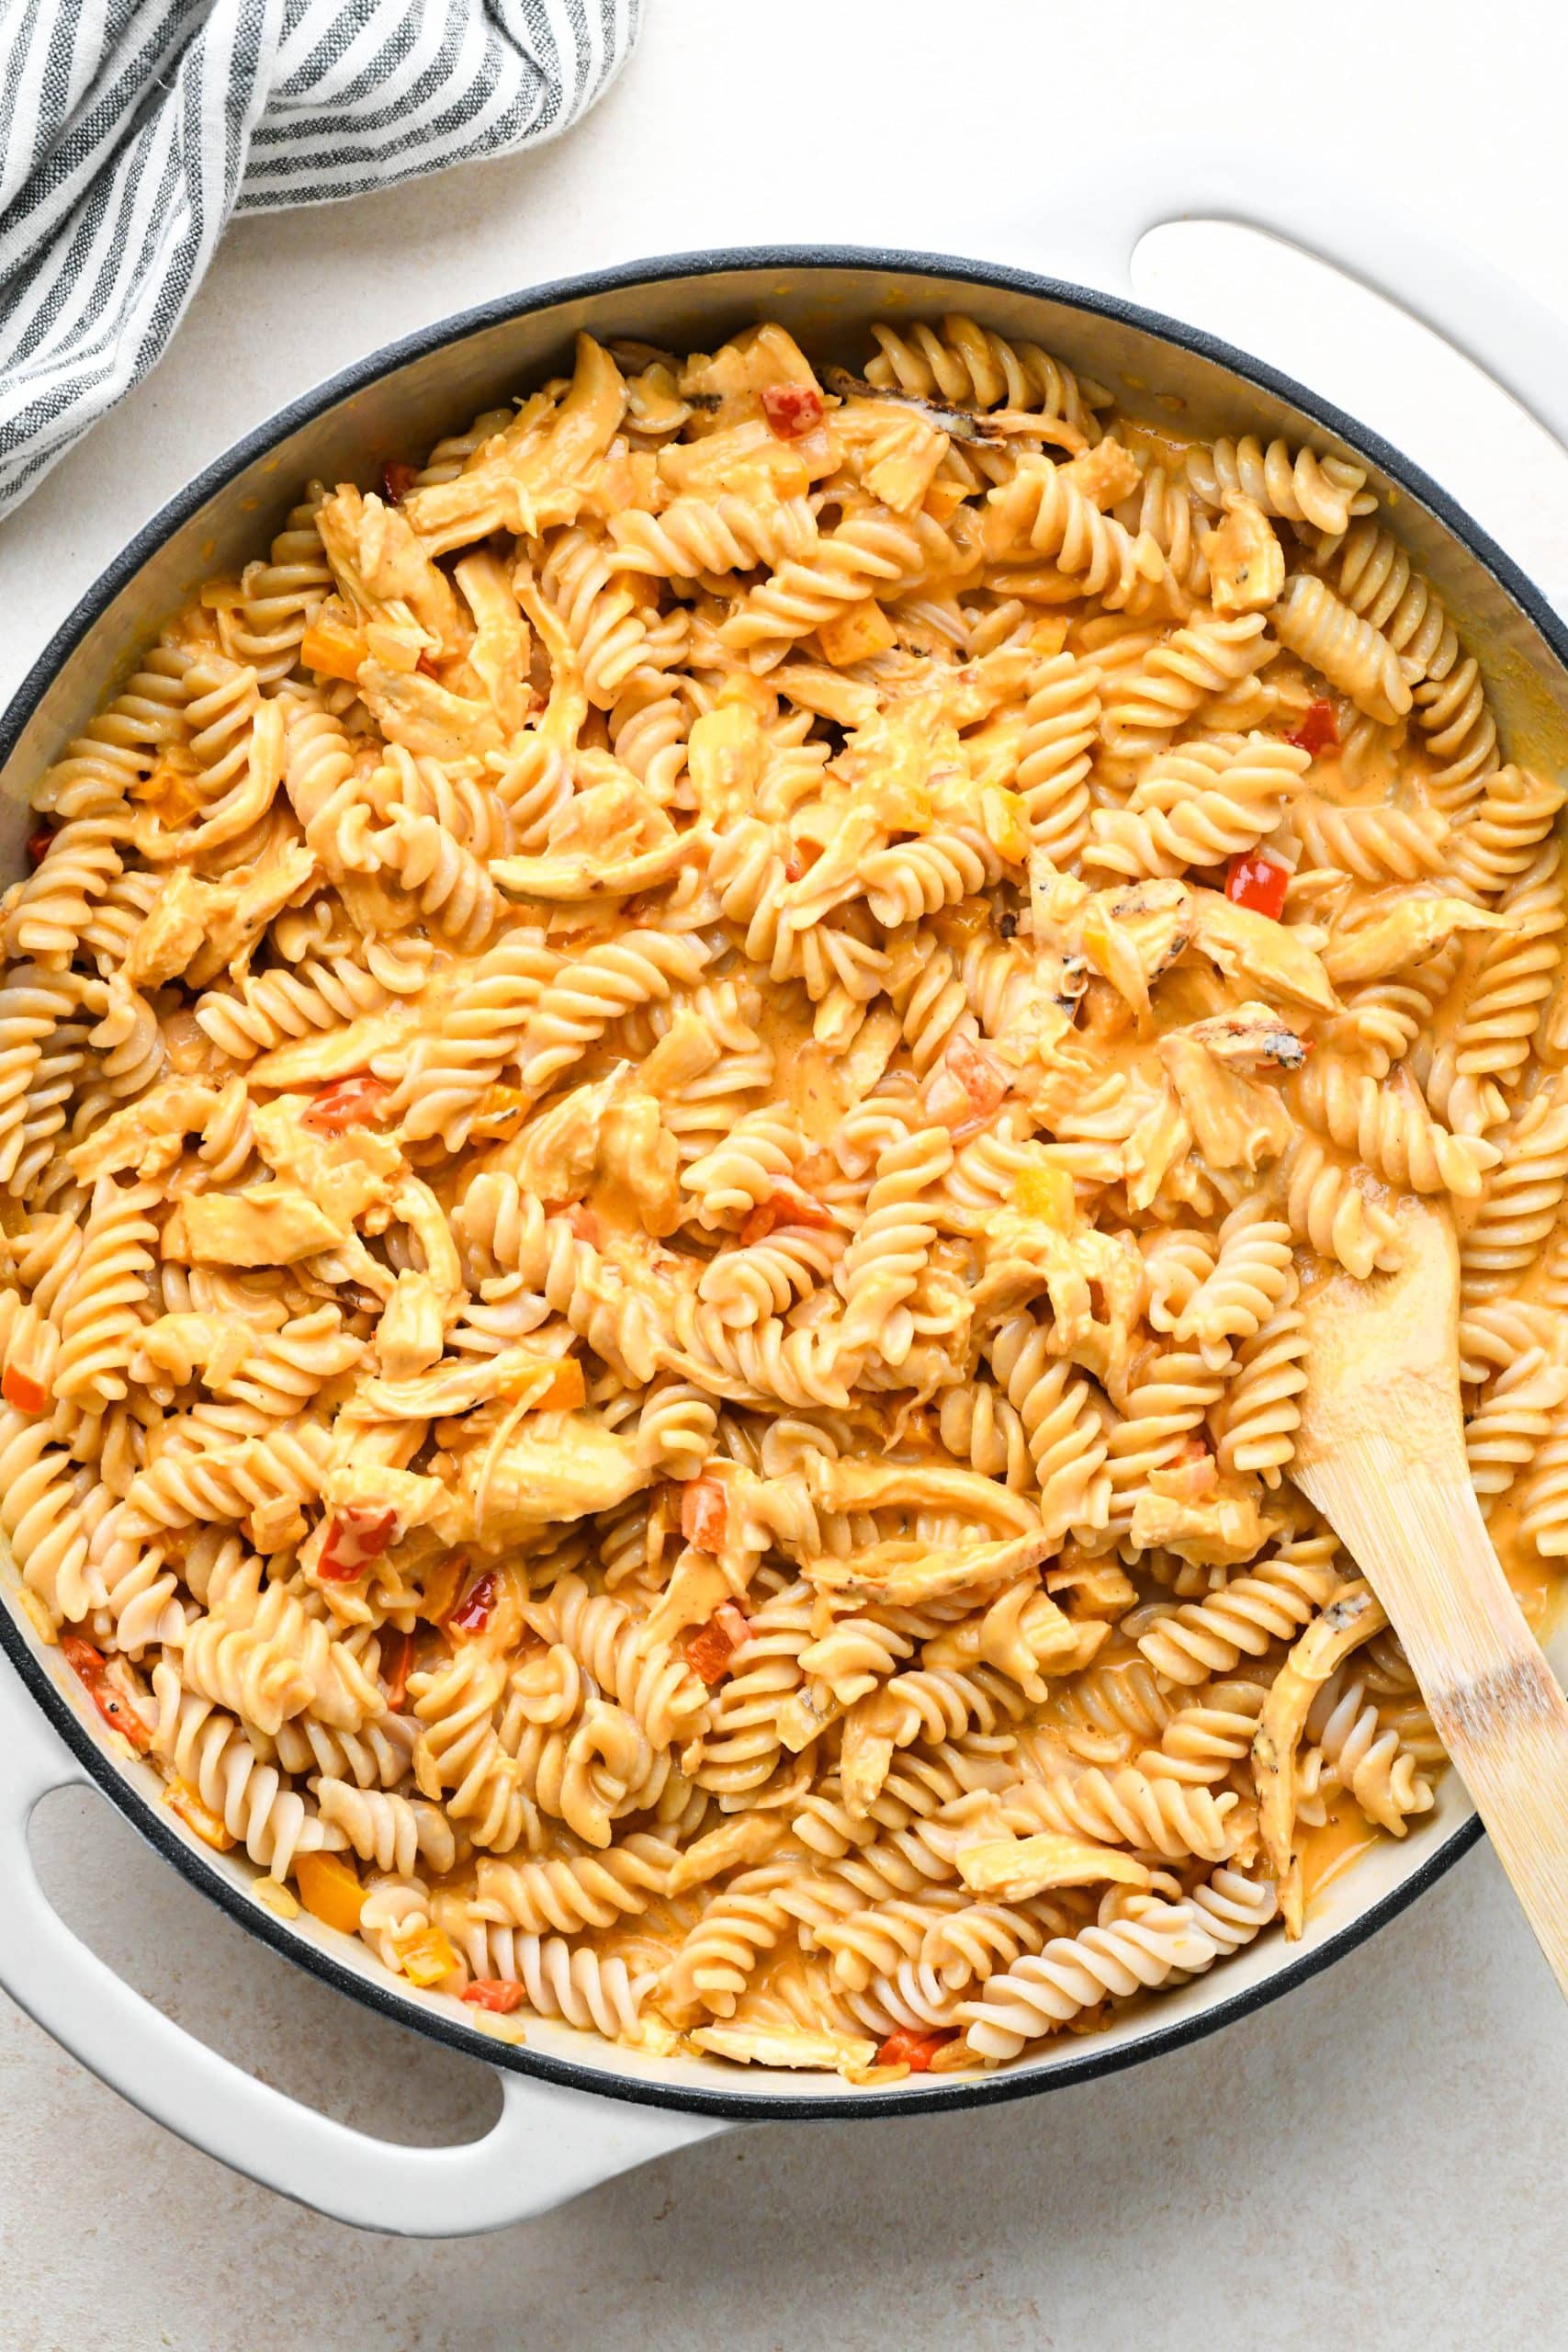 How to make buffalo chicken pasta: Finished pasta, noodles, veggies, and chicken coated with the spicy sauce in large skillet.